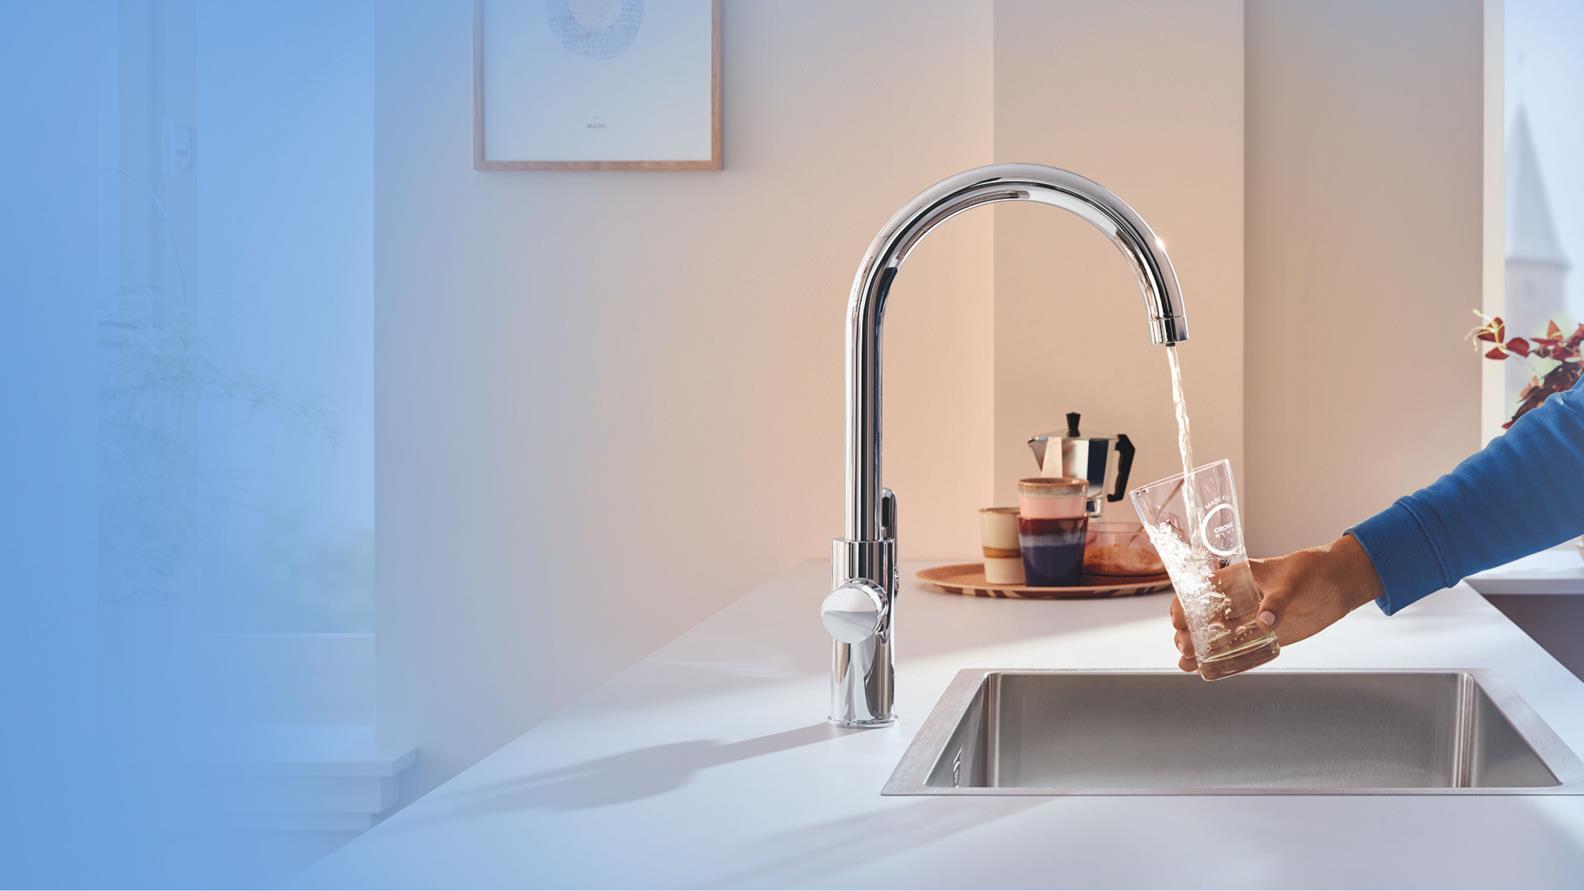 https://www.groheblue.fr/-/media/watersystem/product-ranges/grohe-pure/grohepure-stage-desktop.ashx?w=1312&h=738&updated=20230215T102655Z&hash=983443AF4A875B08049137EBA576CD097793C6AA